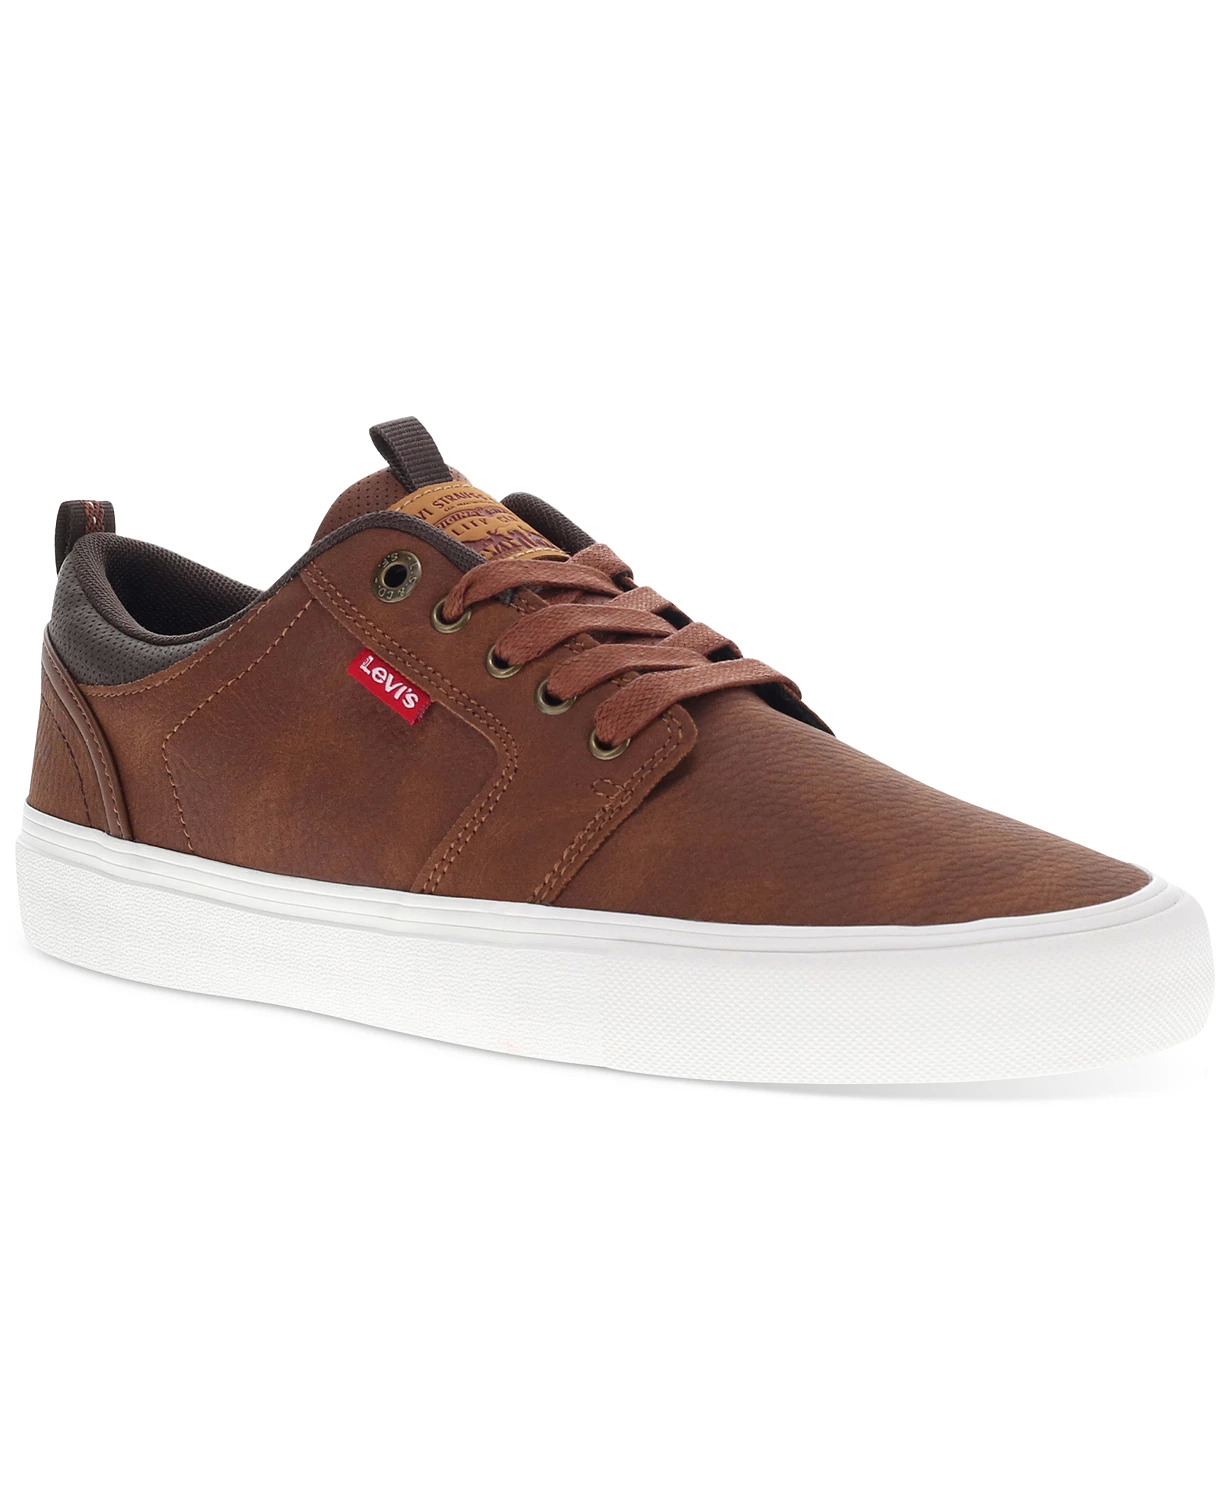 Levi's Men's Sneakers (various styles) $20, Levi's Women's Naya Sporty Skate Sneakers (black/white) $20 + SD Cashback + Free Store Pickup at Macy's or FS on $25+